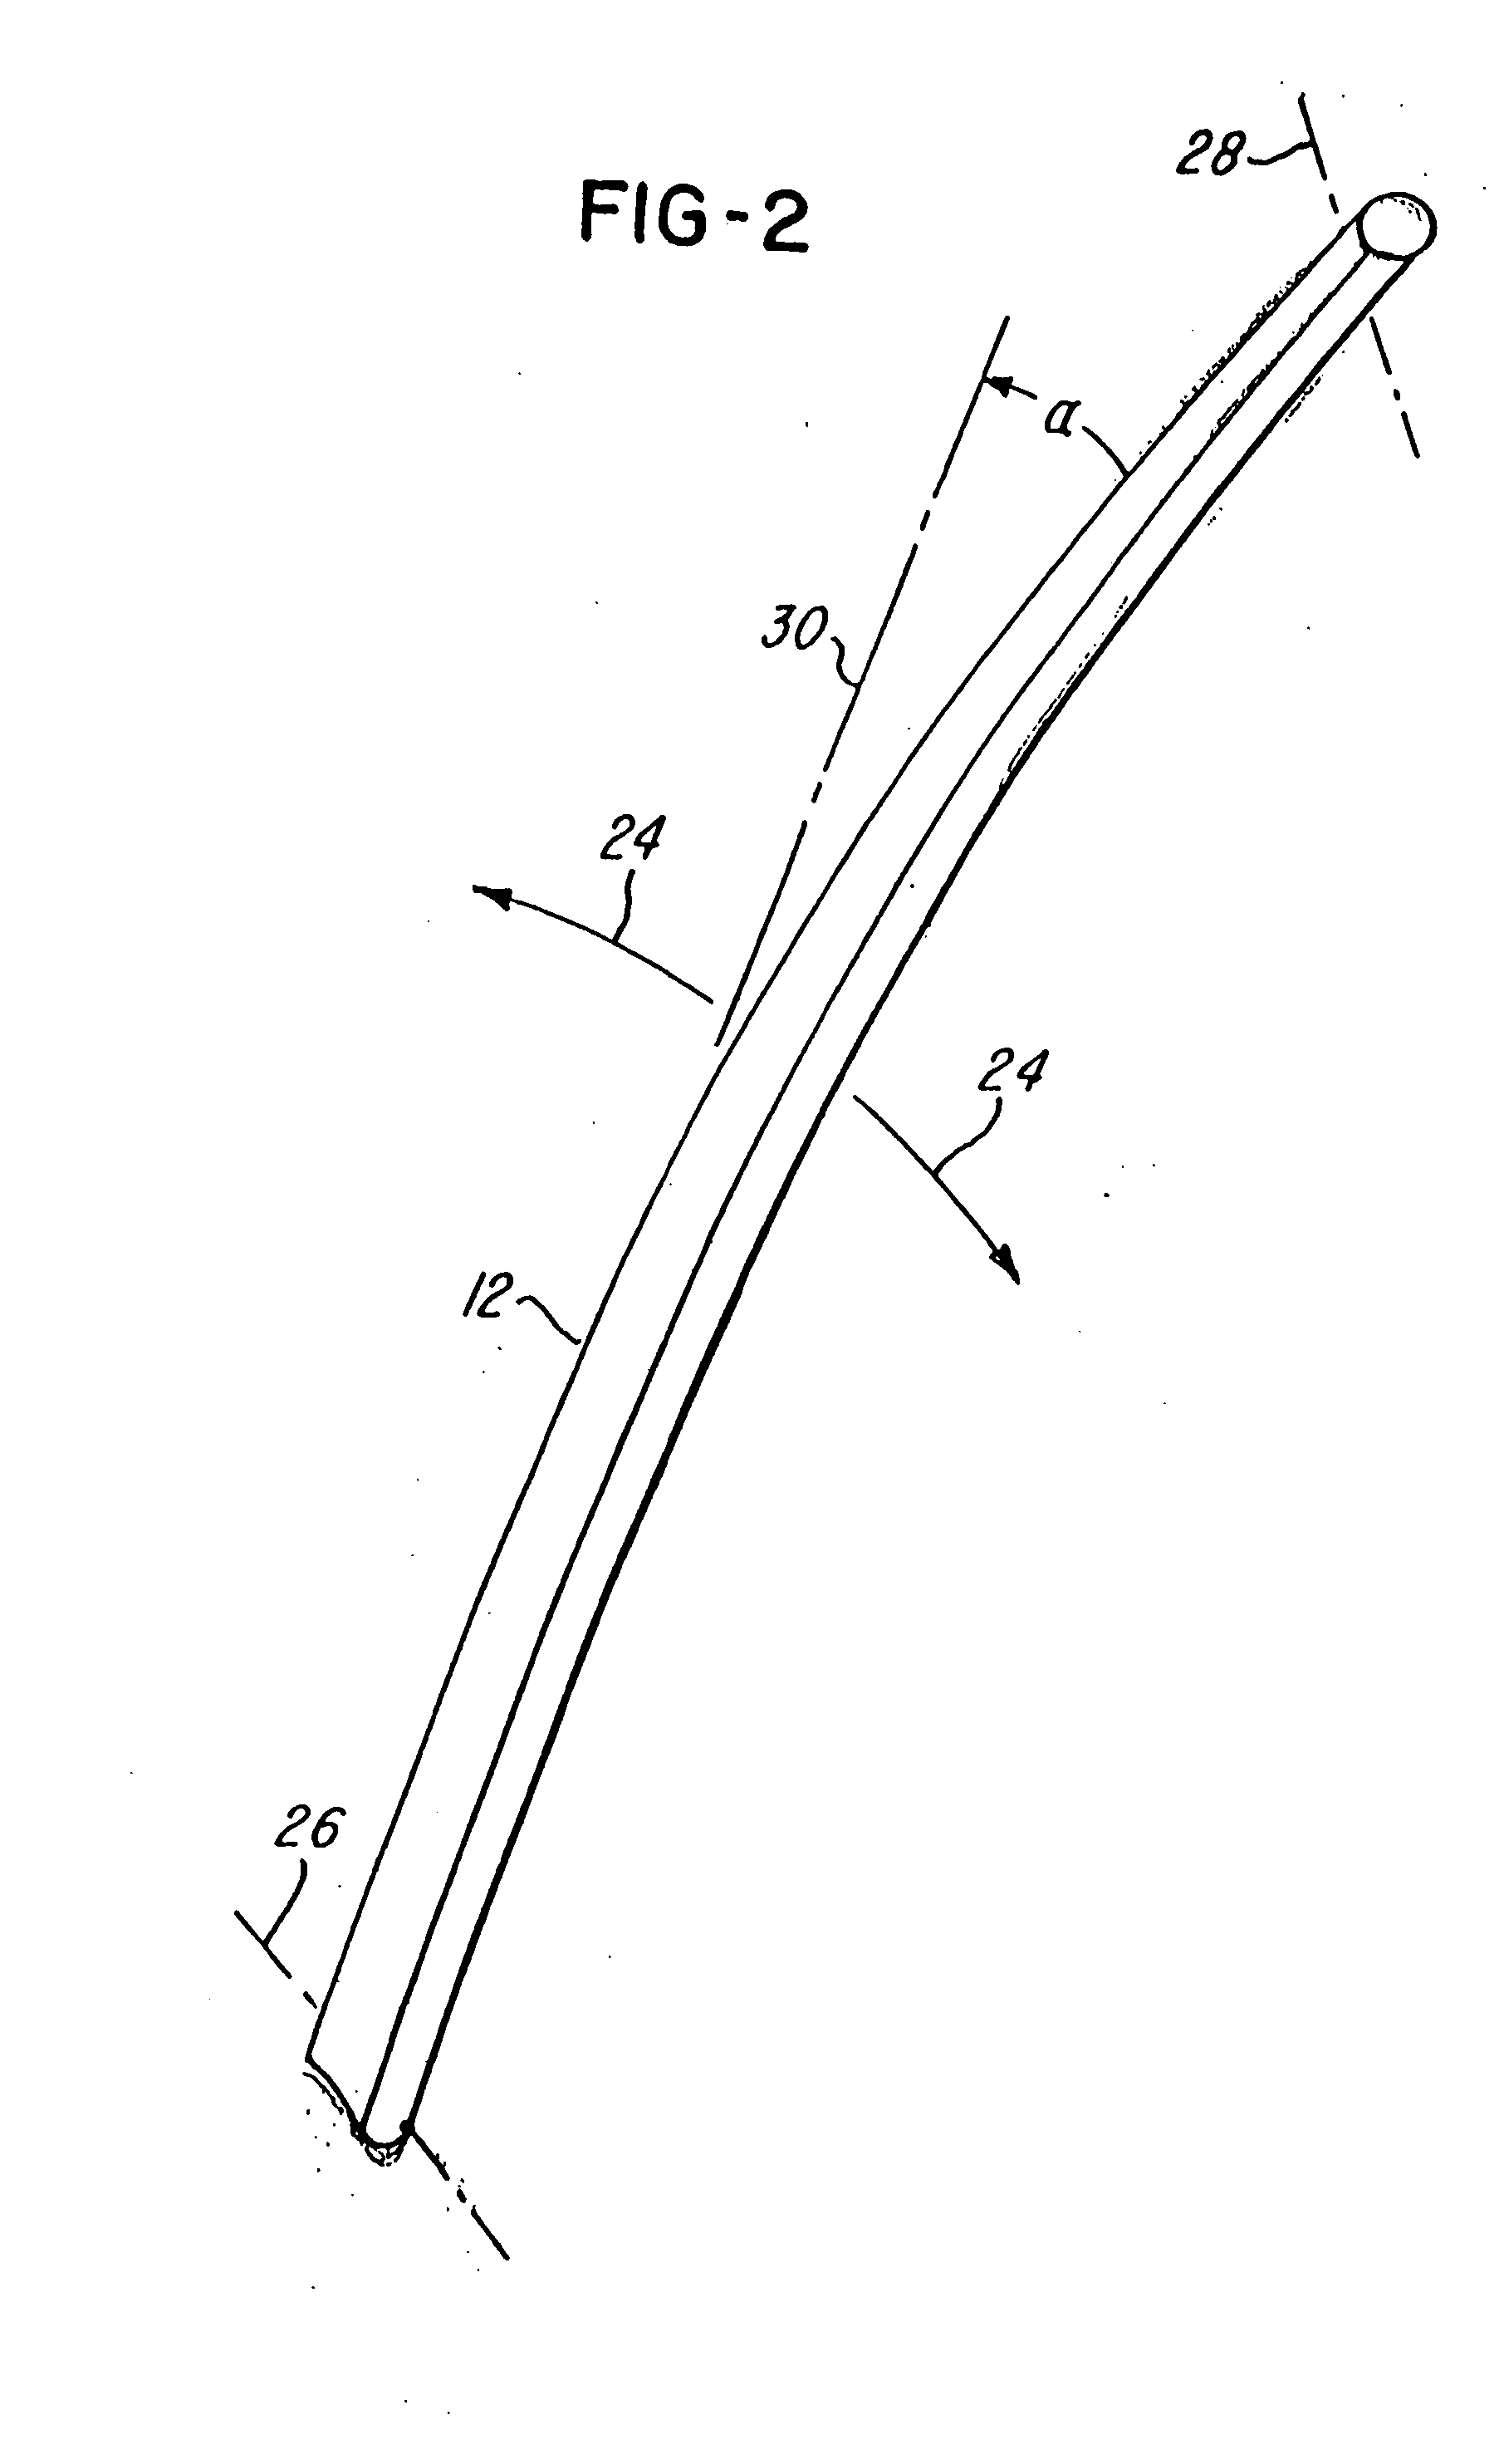 Windshield wiper system with tubular drive arm and cavity